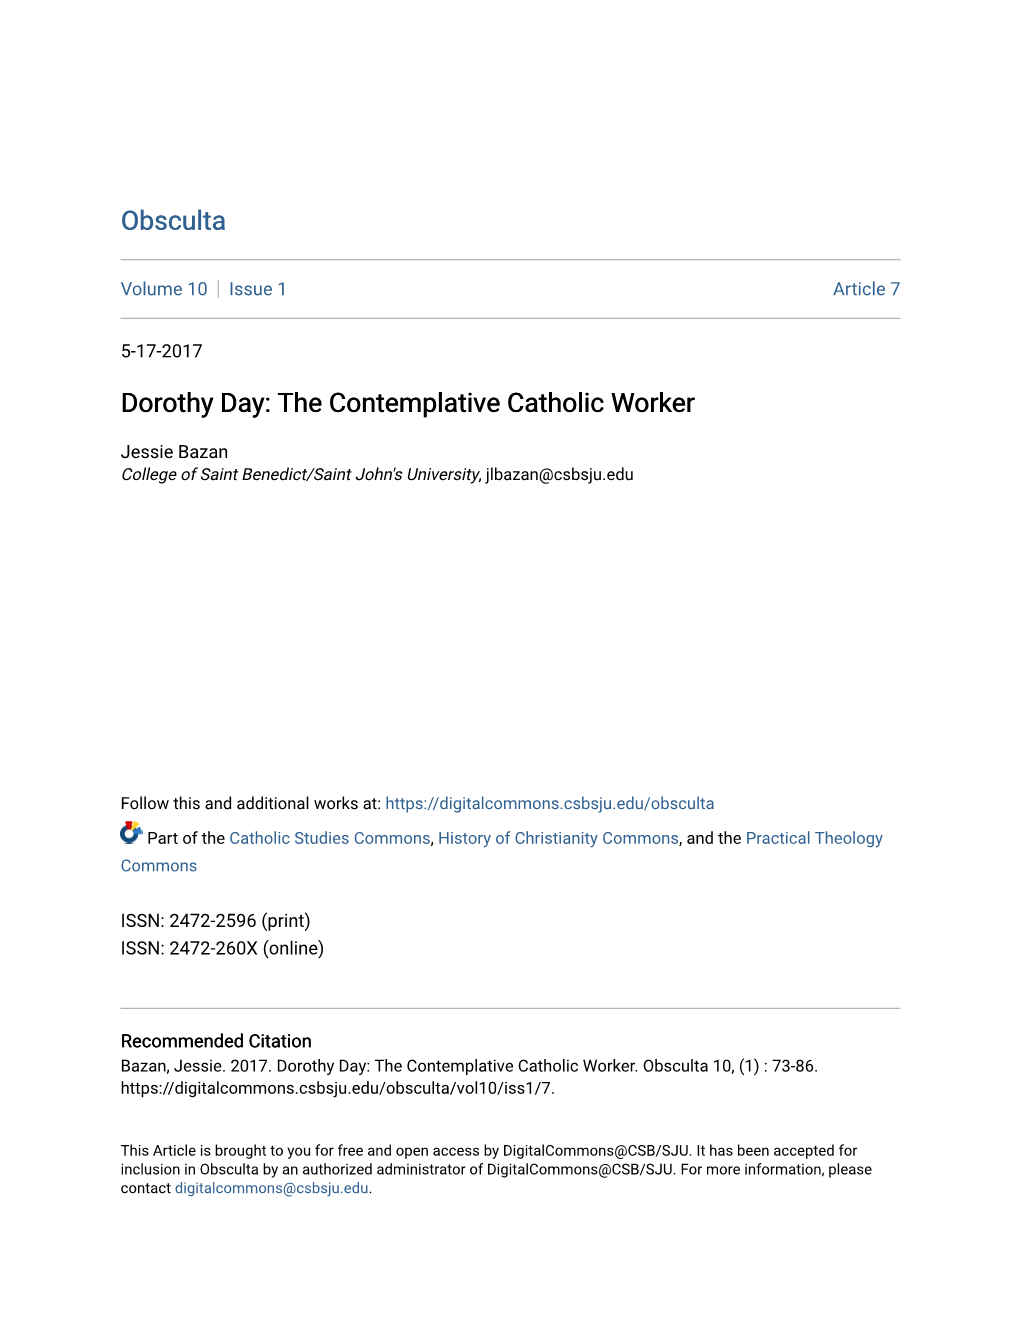 Dorothy Day: the Contemplative Catholic Worker